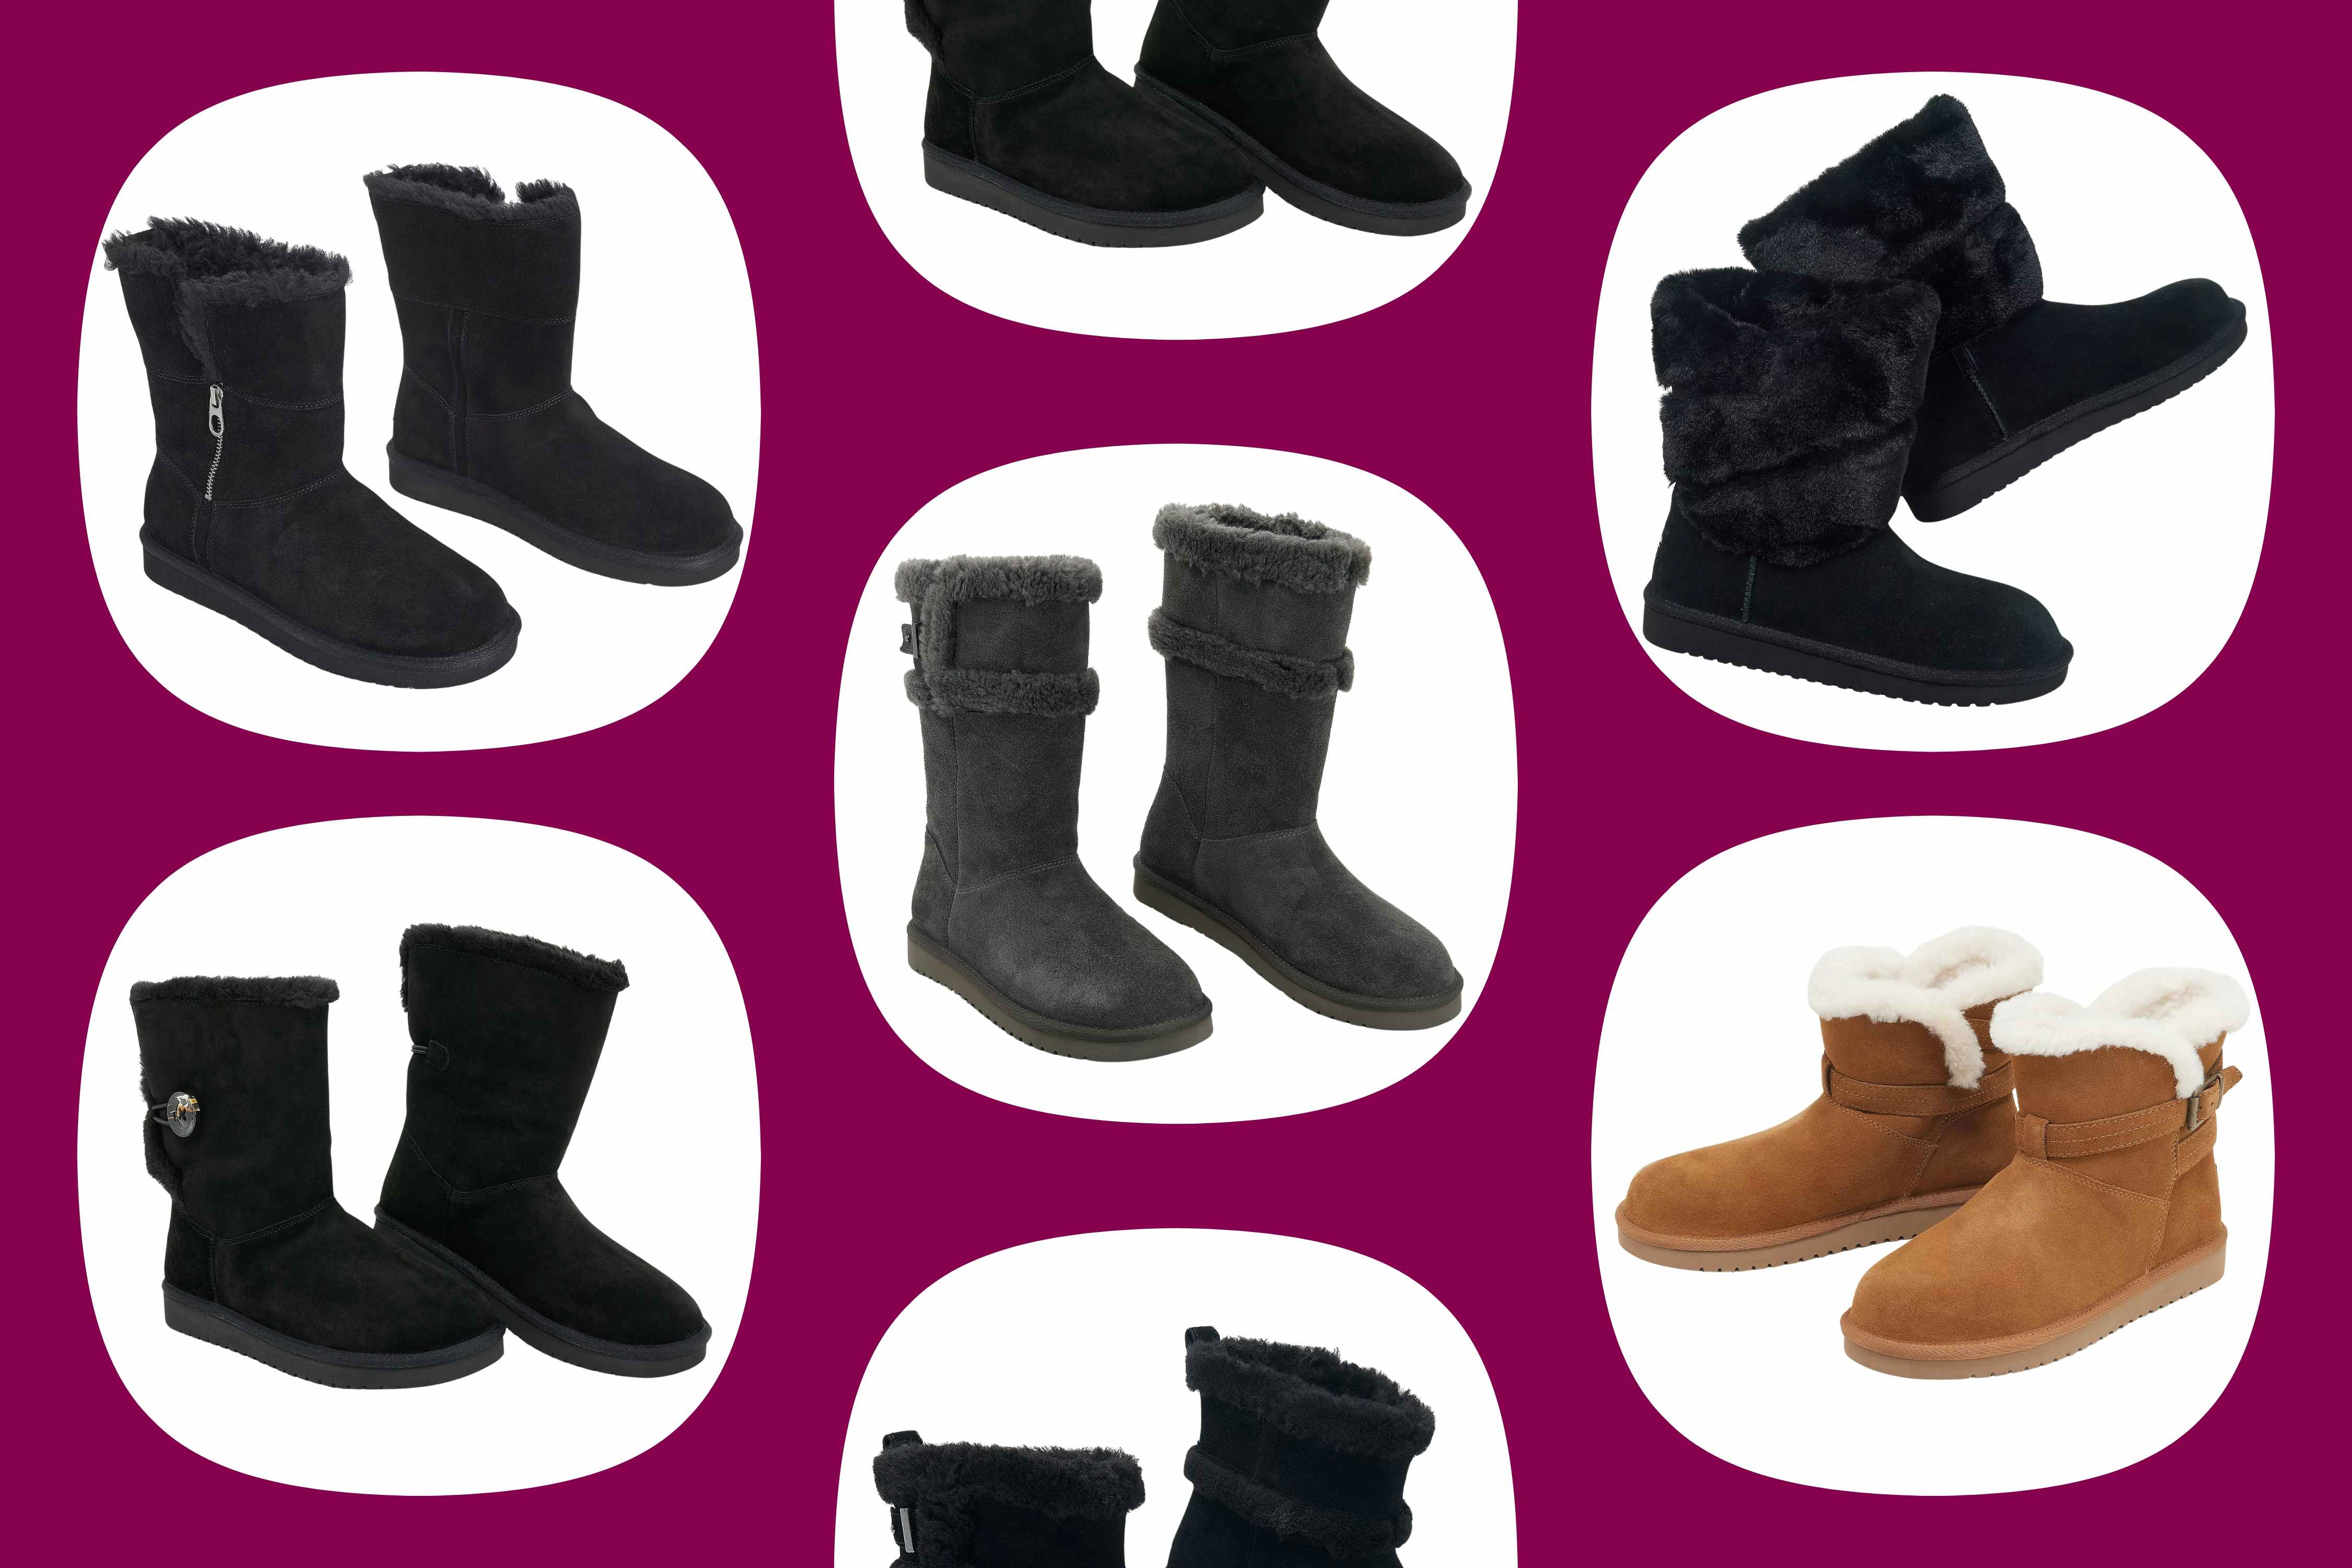 Koolaburra by Ugg Boots, as Low as $33 Shipped at QVC